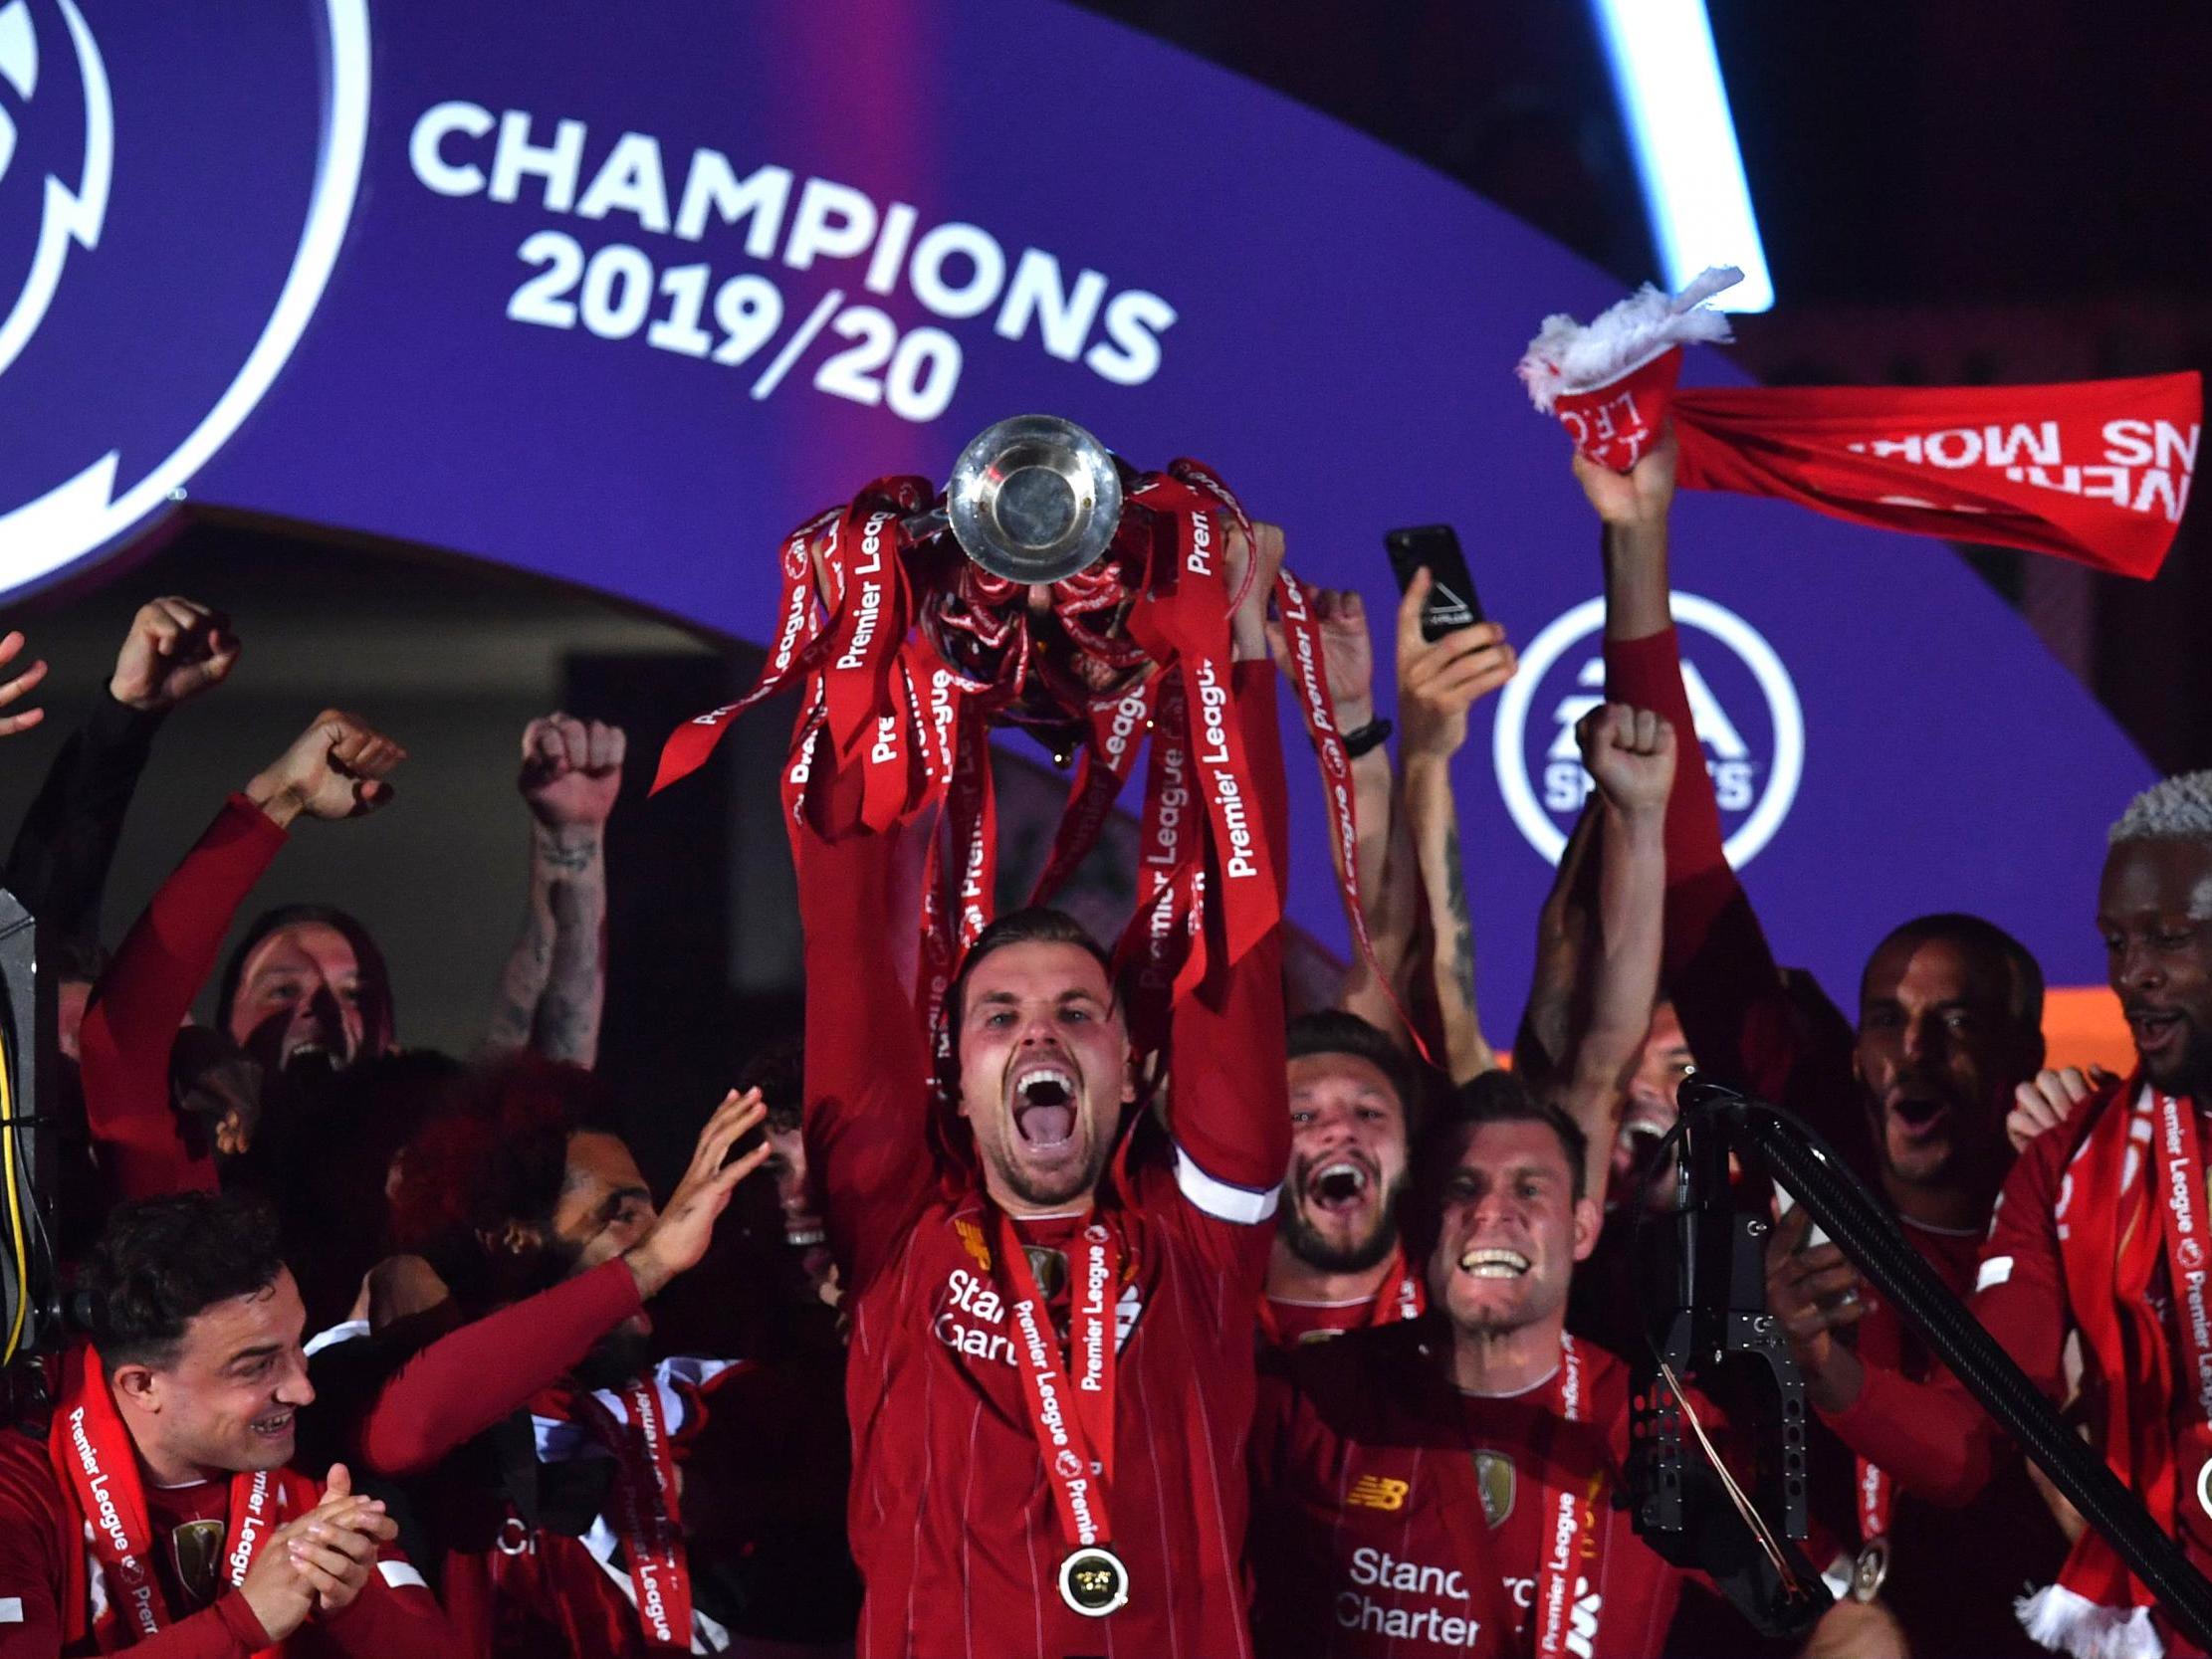 Premier League Fixtures 2020 21 Live Liverpool Manchester United Arsenal And Man City Schedules For New Season Revealed